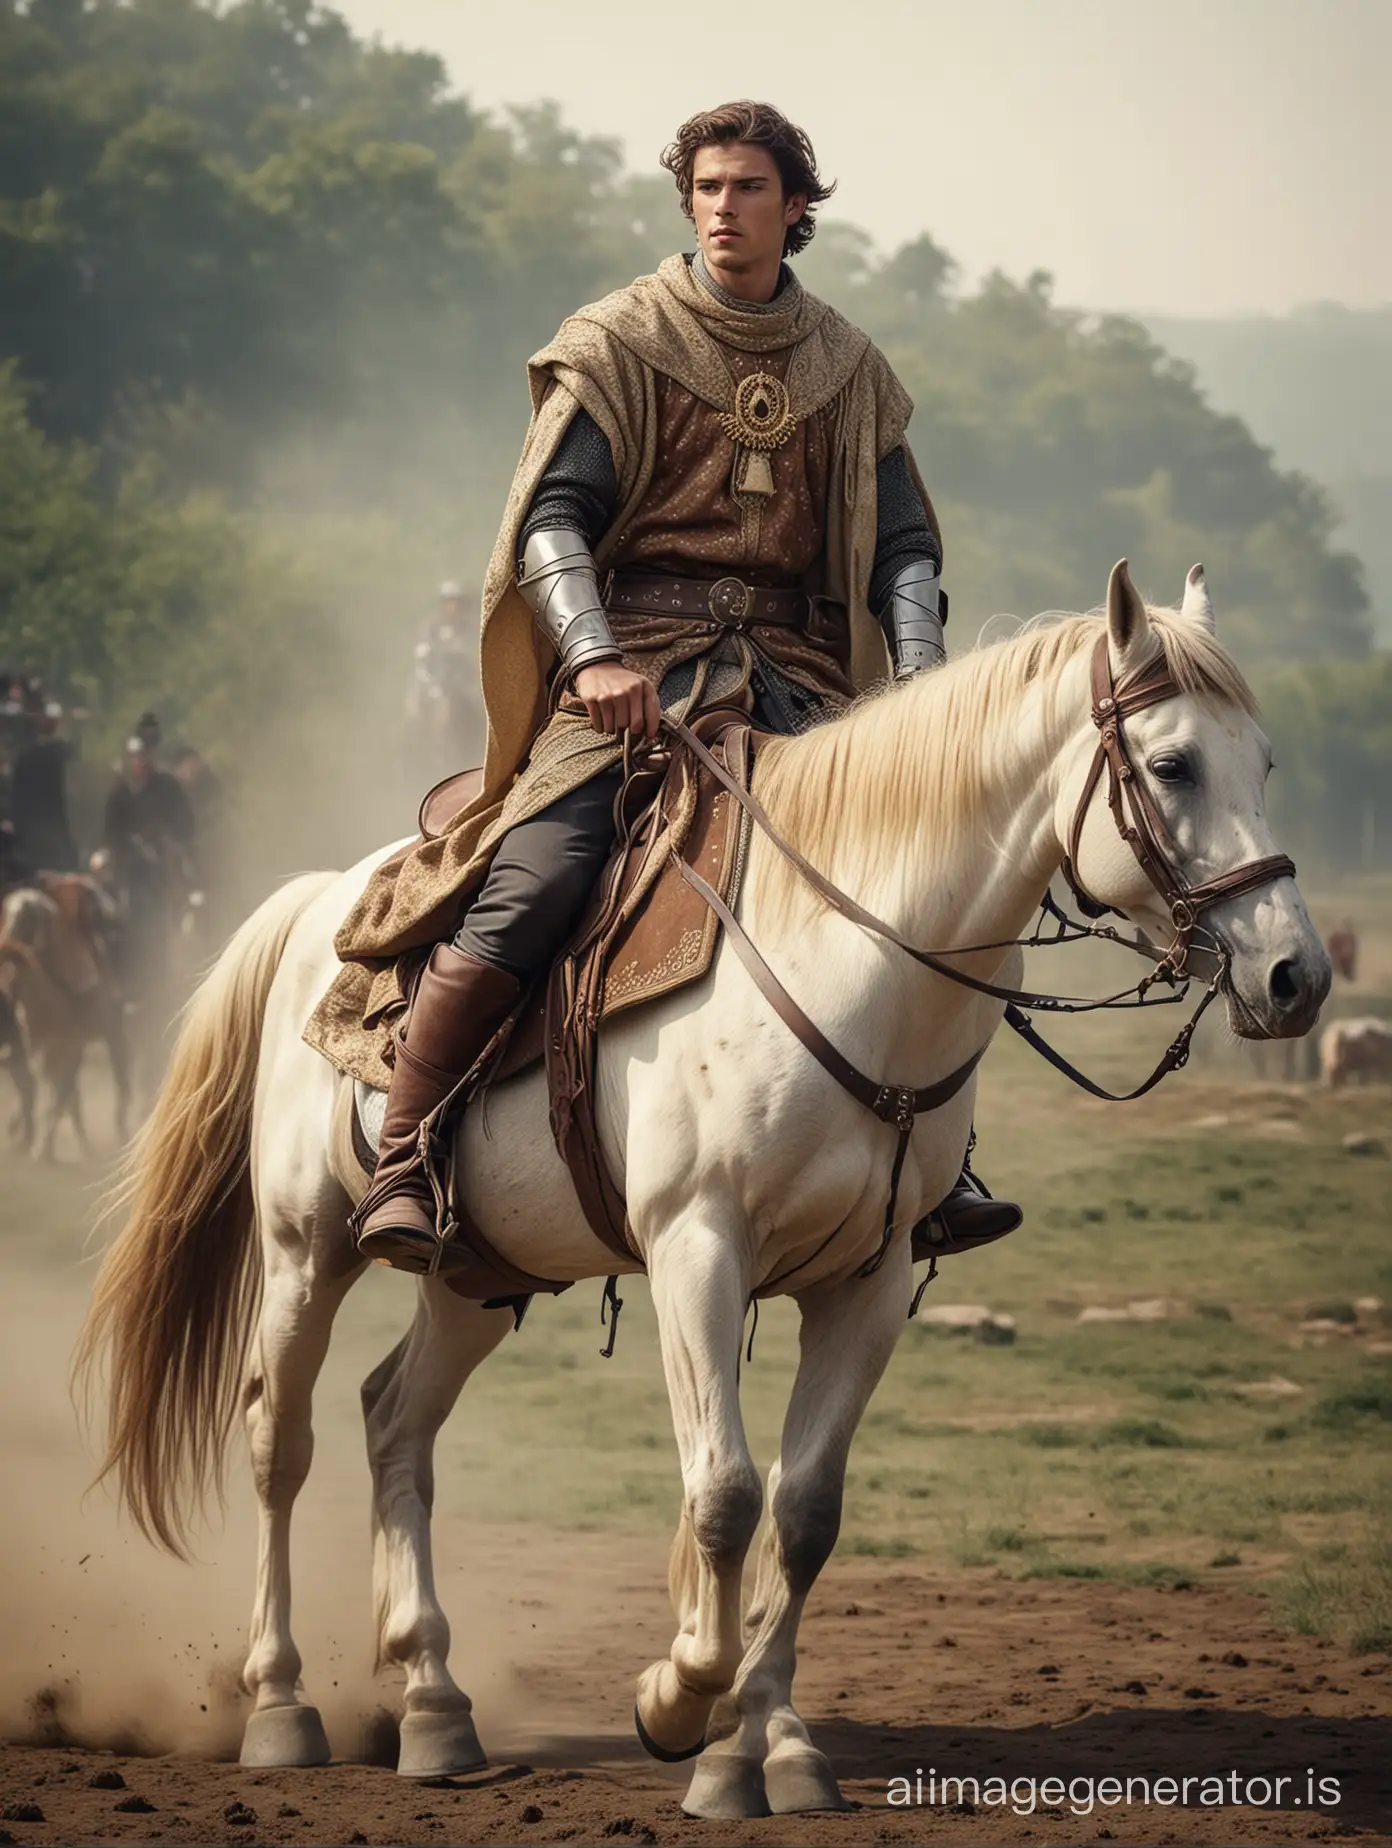 Picture of a young Western feudal lord riding a horse.